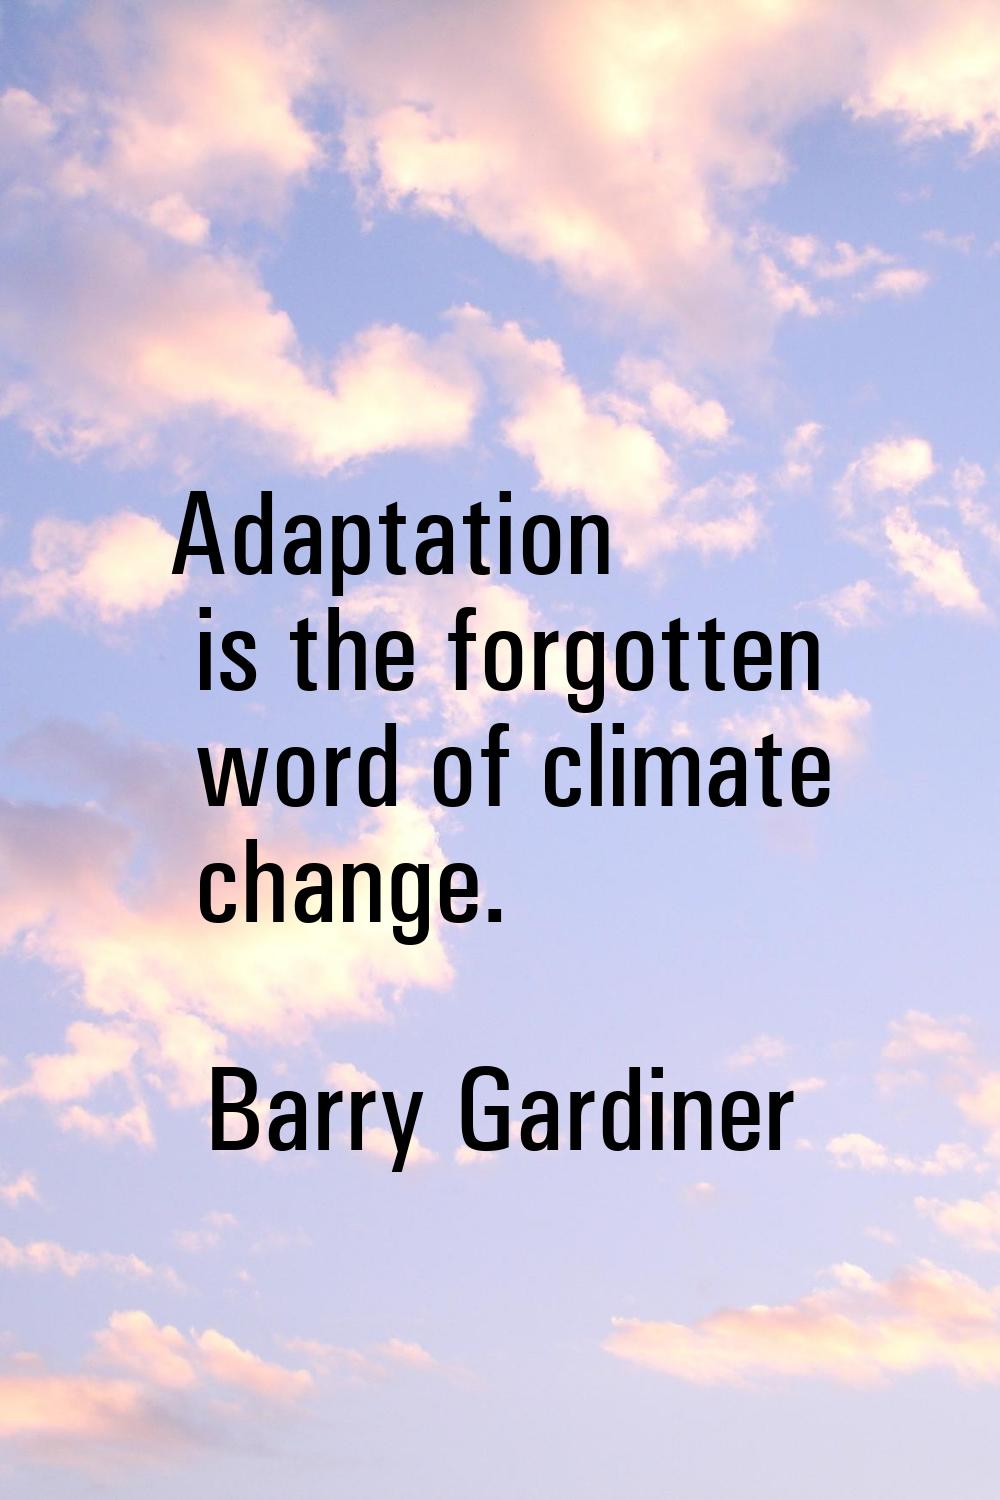 Adaptation is the forgotten word of climate change.